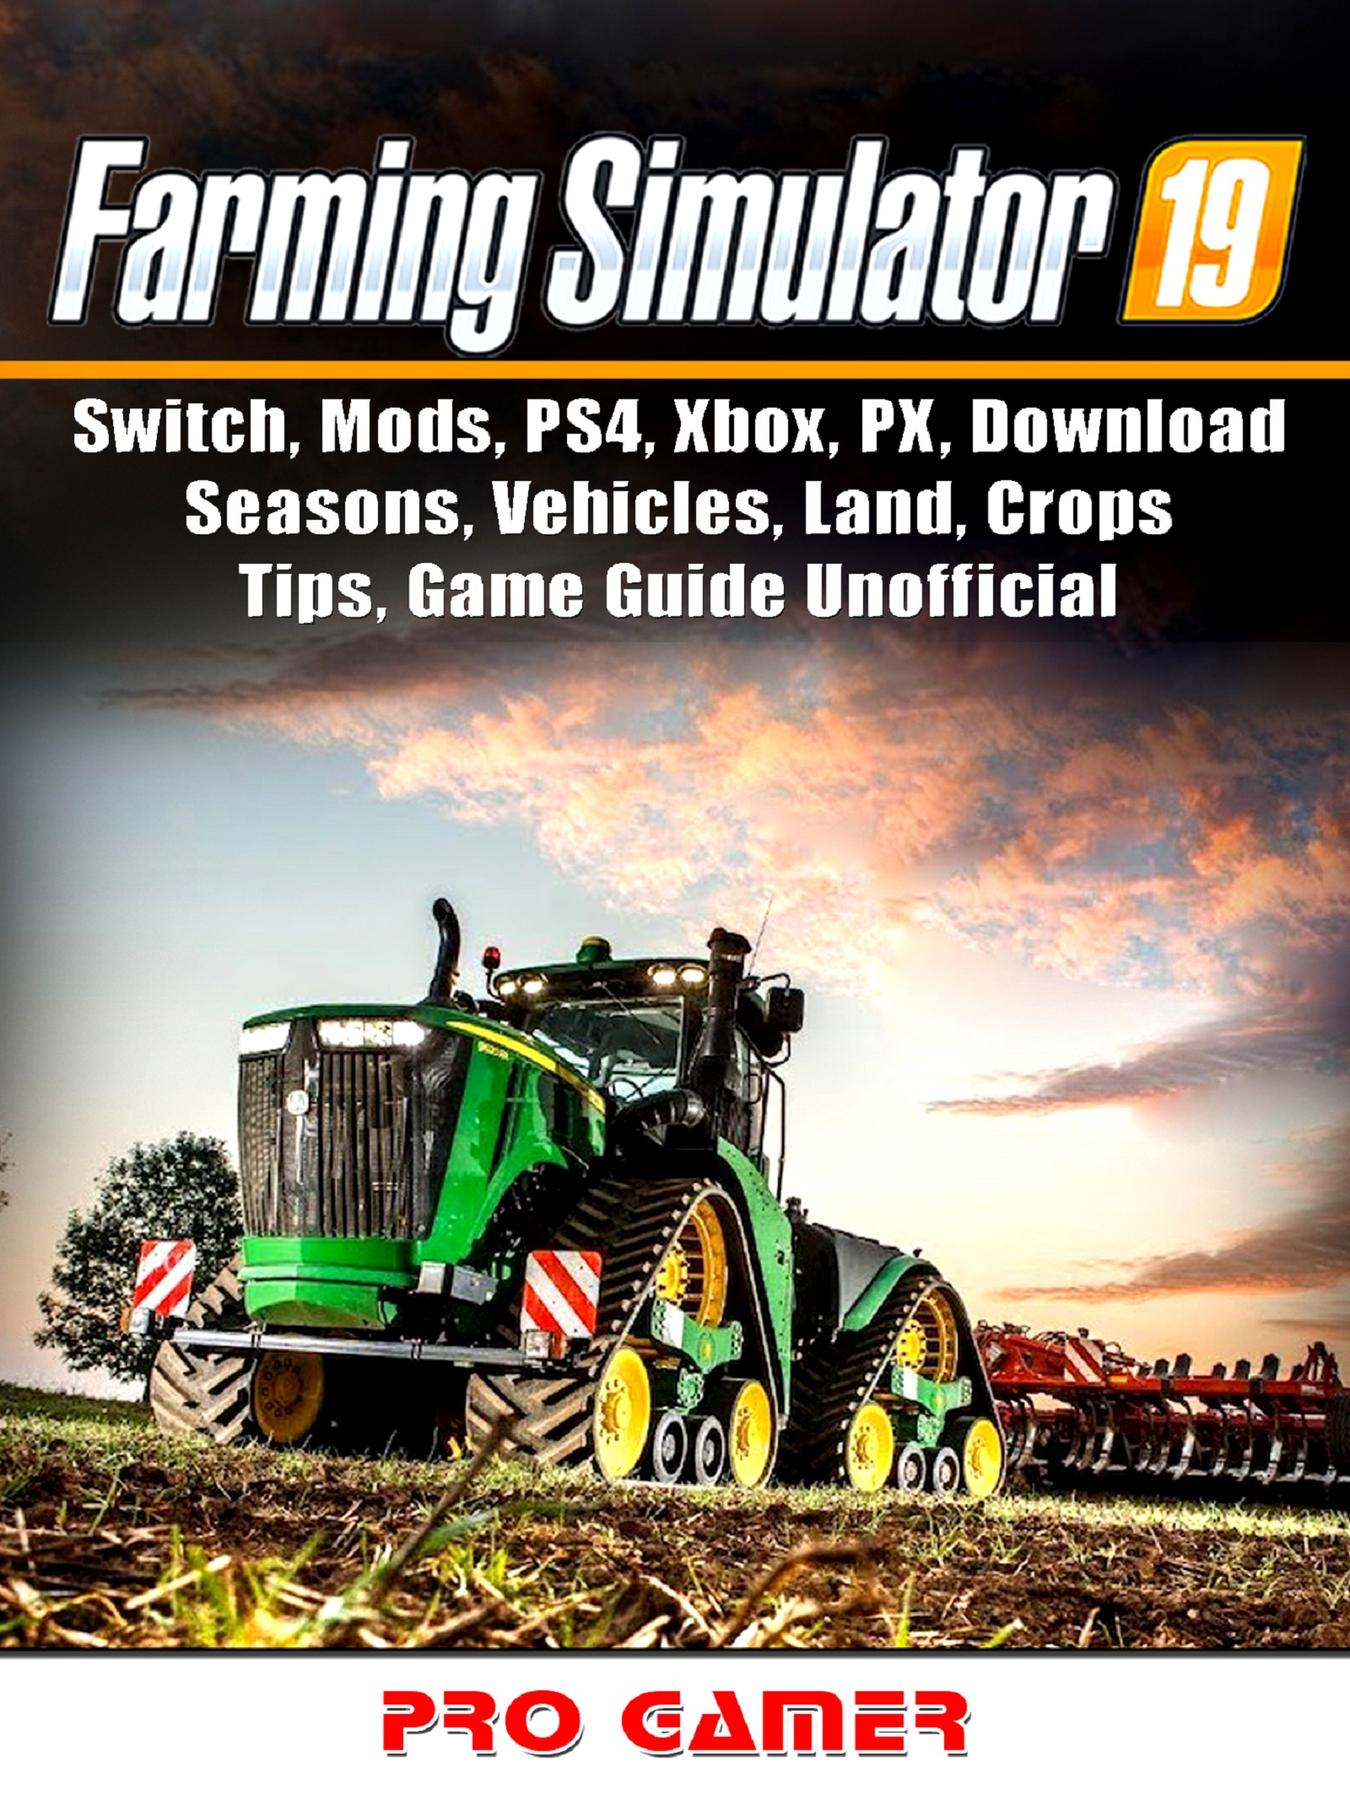 Farming Simulator 19, Switch, Mods, PS4, Xbox, PX, Seasons, Vehicles, Land, Crops, Game Guide Unofficial by Pro Gamer - on Glose Glose